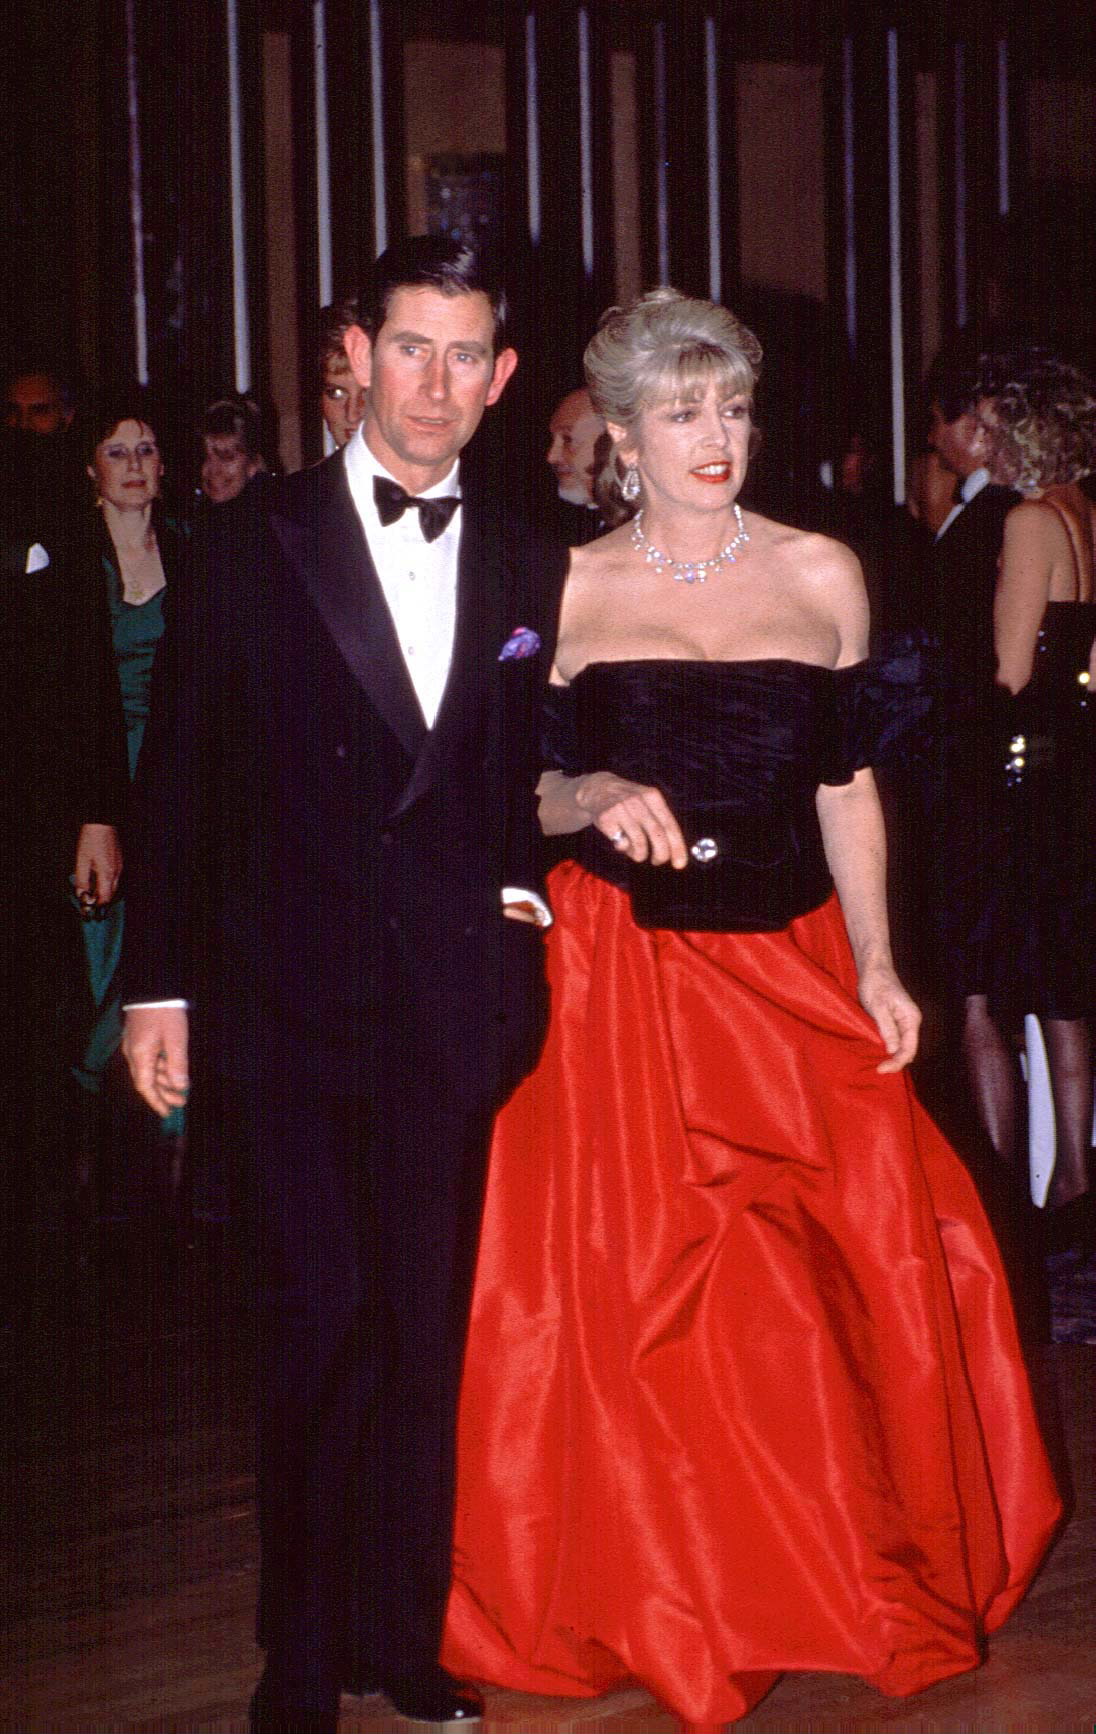 Prince Charles and Lady Dale Tryon in London, UK, circa 1990 | Source: Getty Images